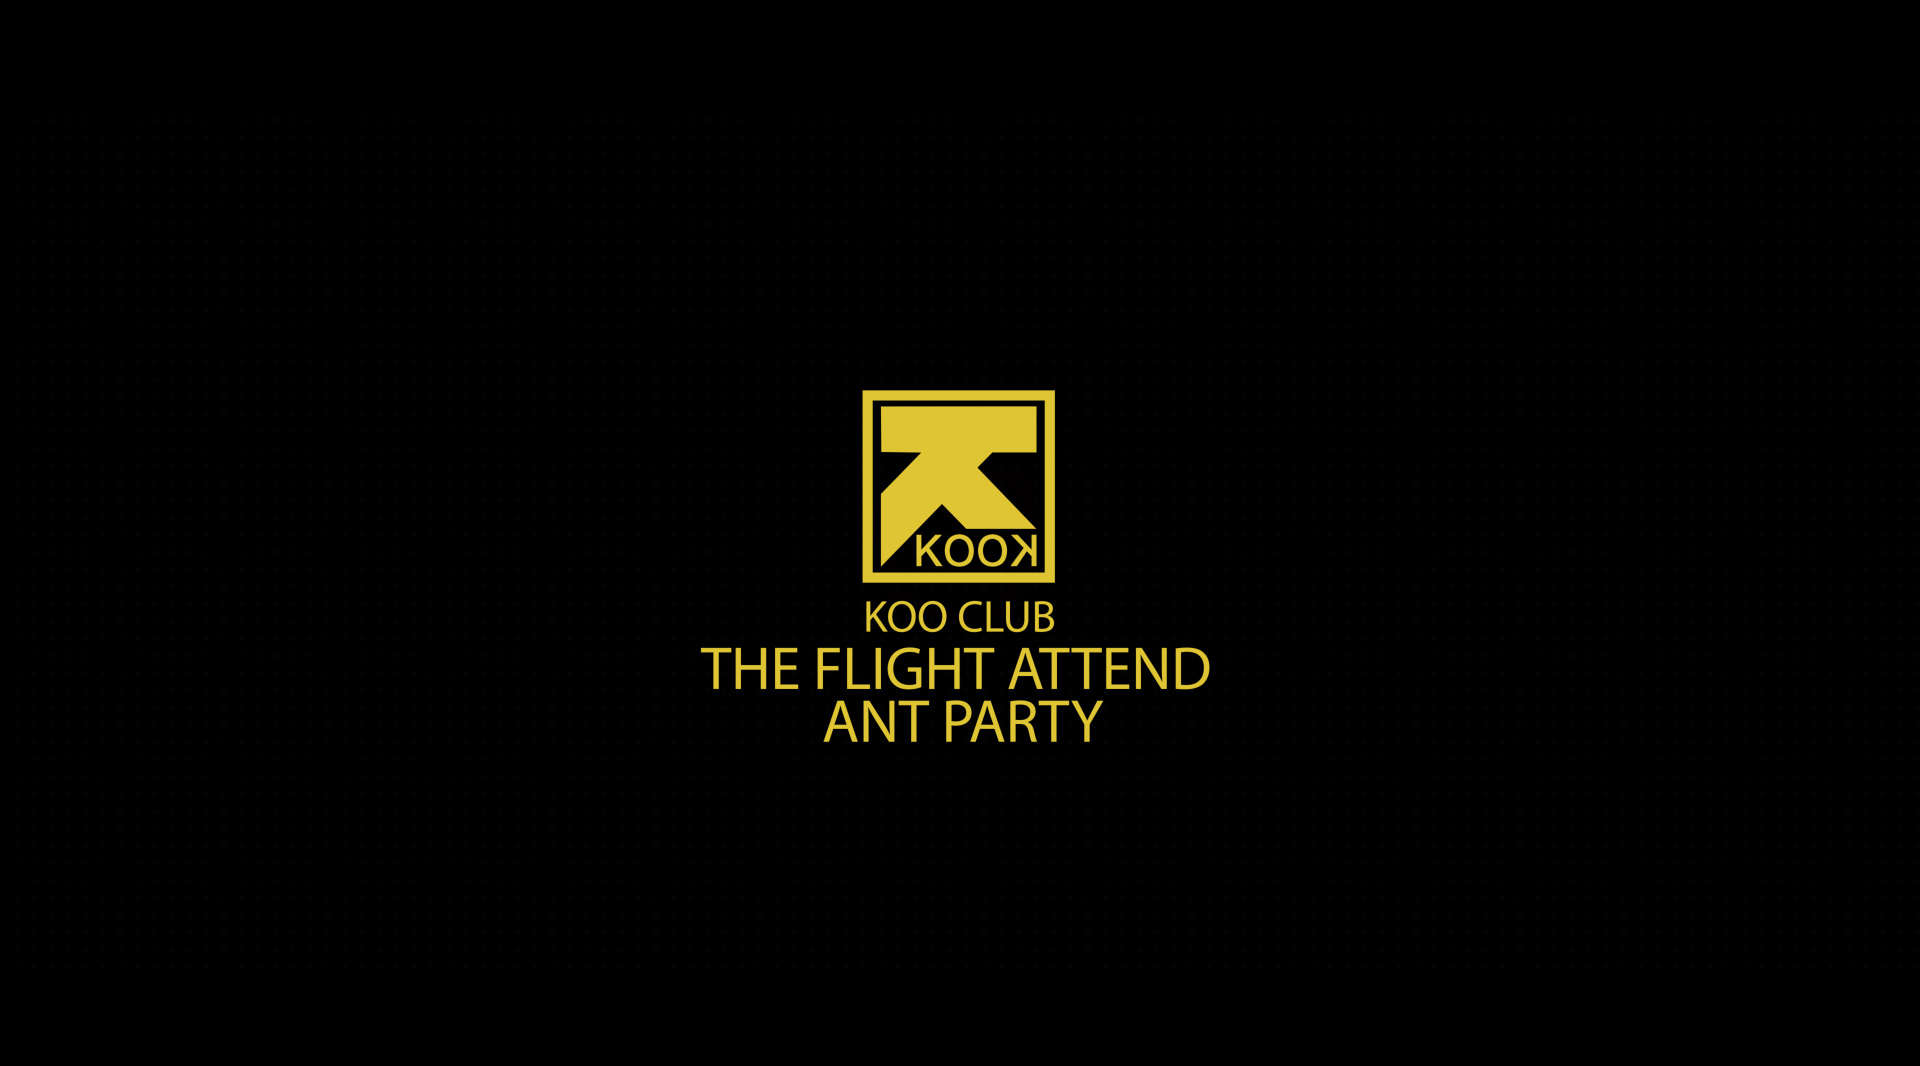 Koo Club/The Flight Attend Ant Party